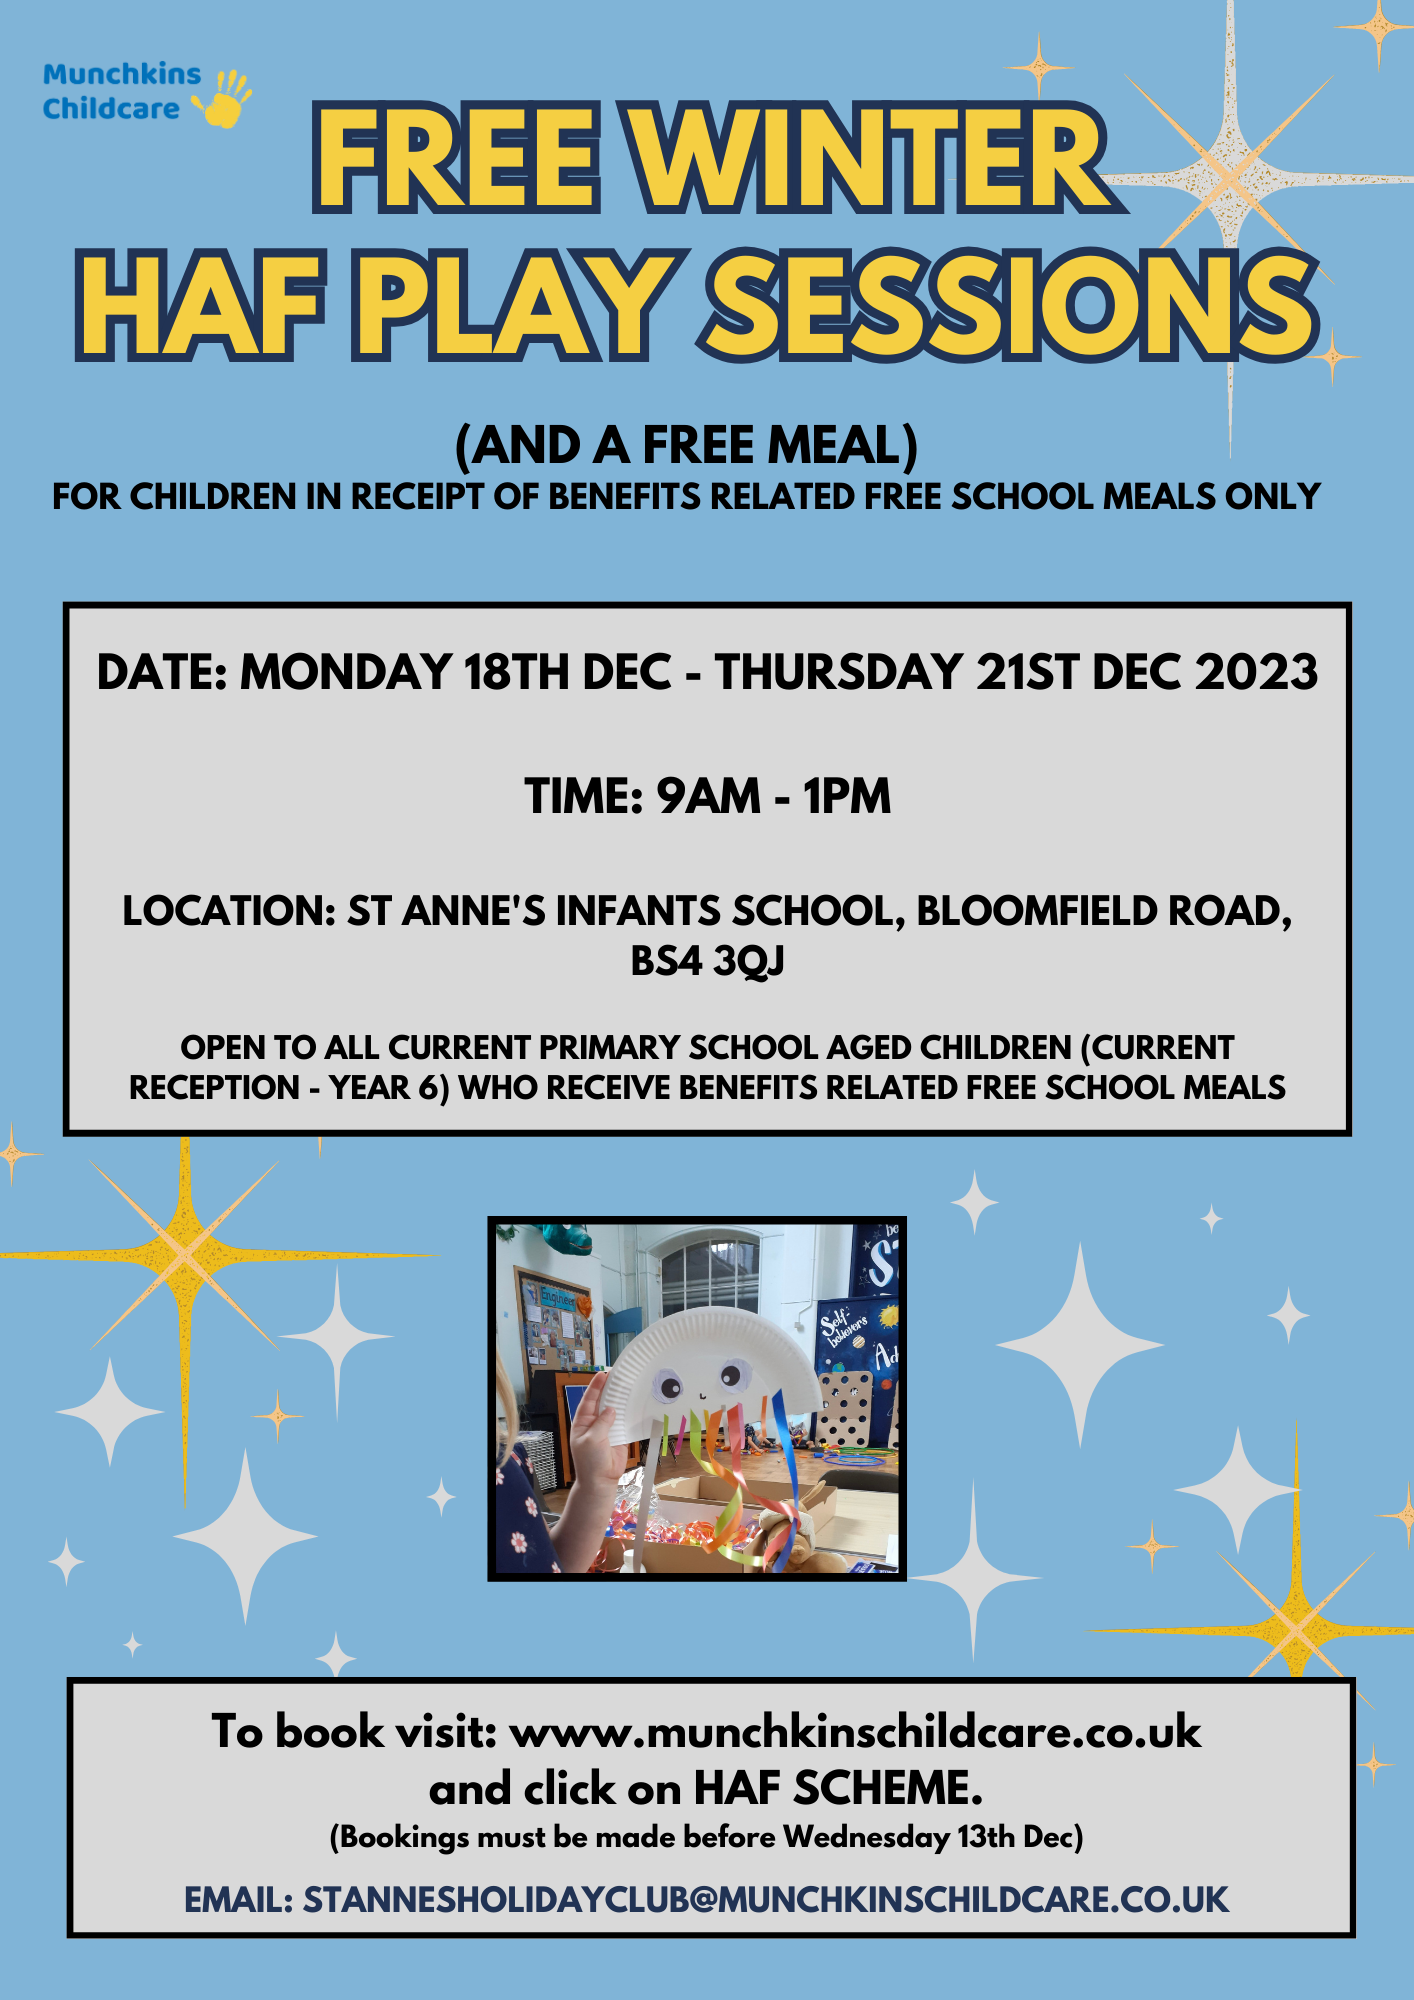 Free Winter play sessions for children in receipt of benefits related free school meals. 18th-21st December at St Annes Infant School